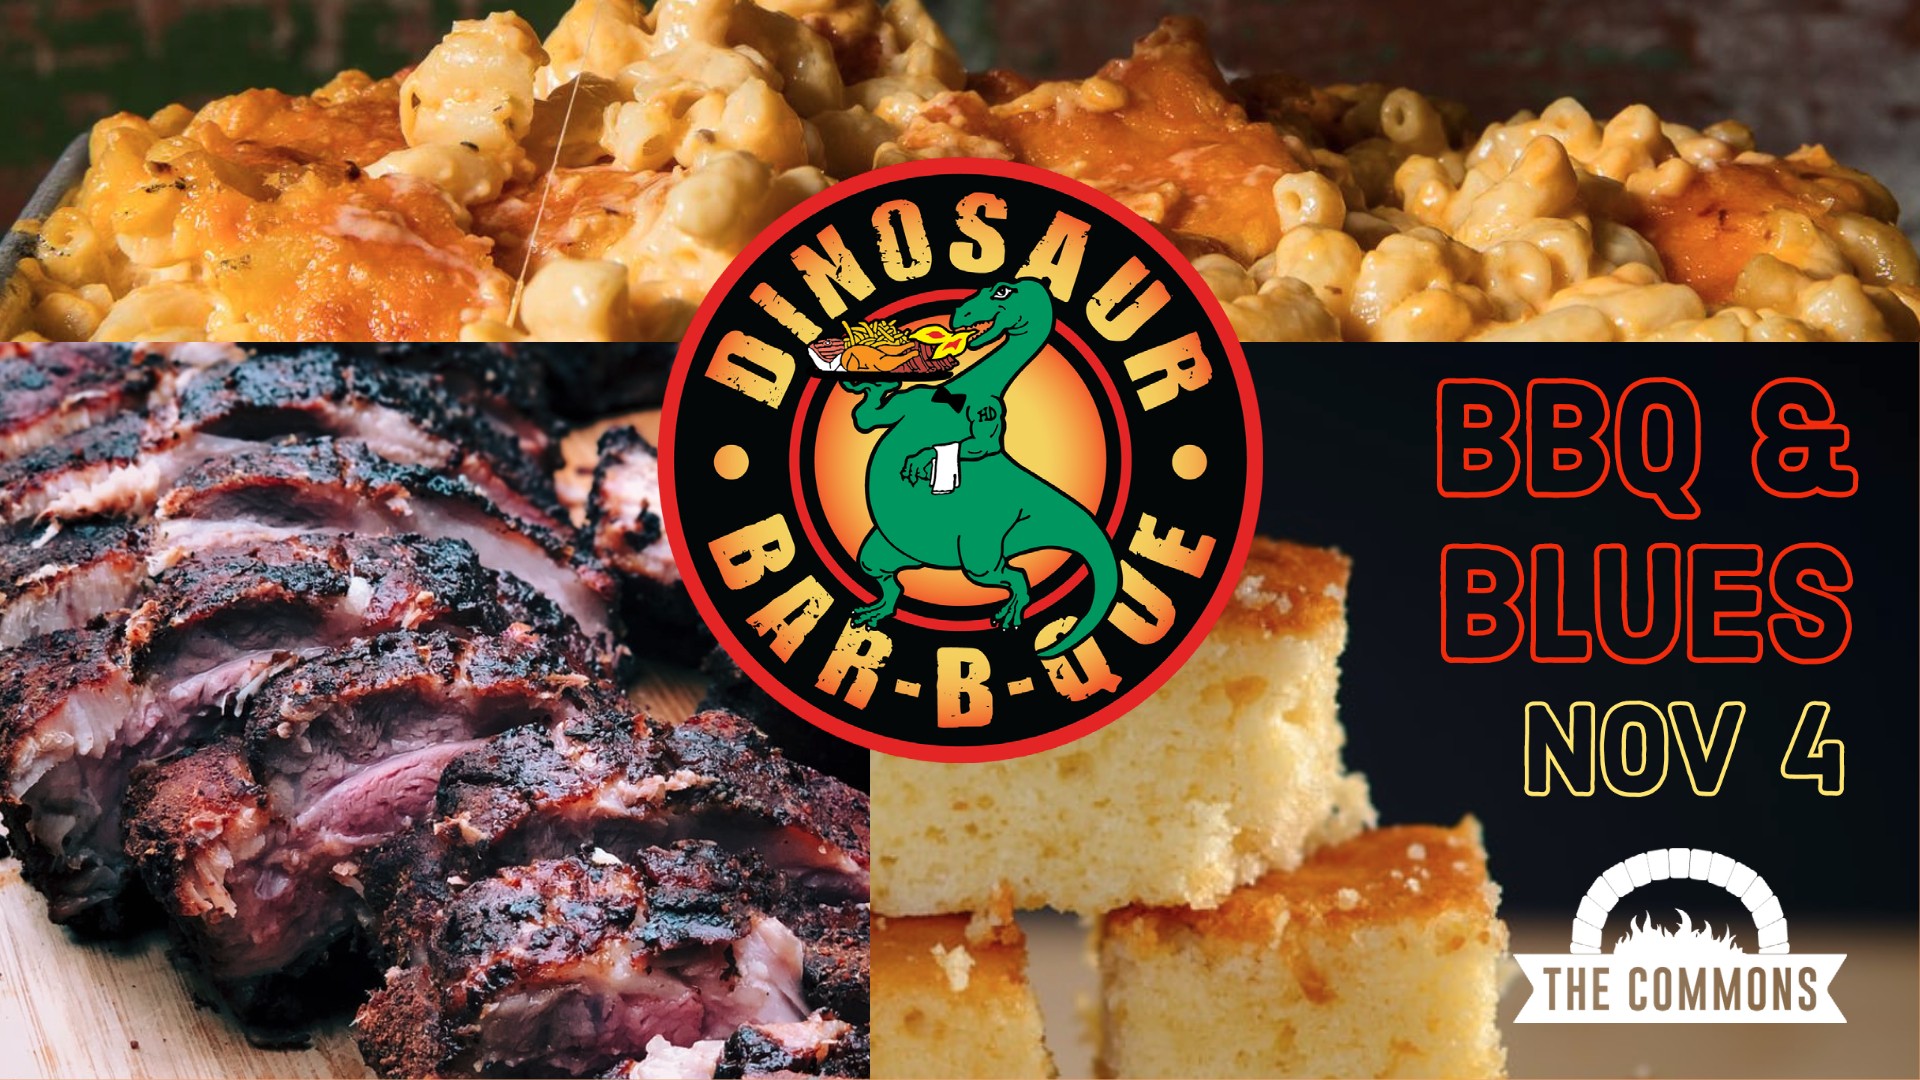 pictures of ribs, mac n cheese, and cornbread with "BBQ & Blues" and the Dinosaur BBQ logo